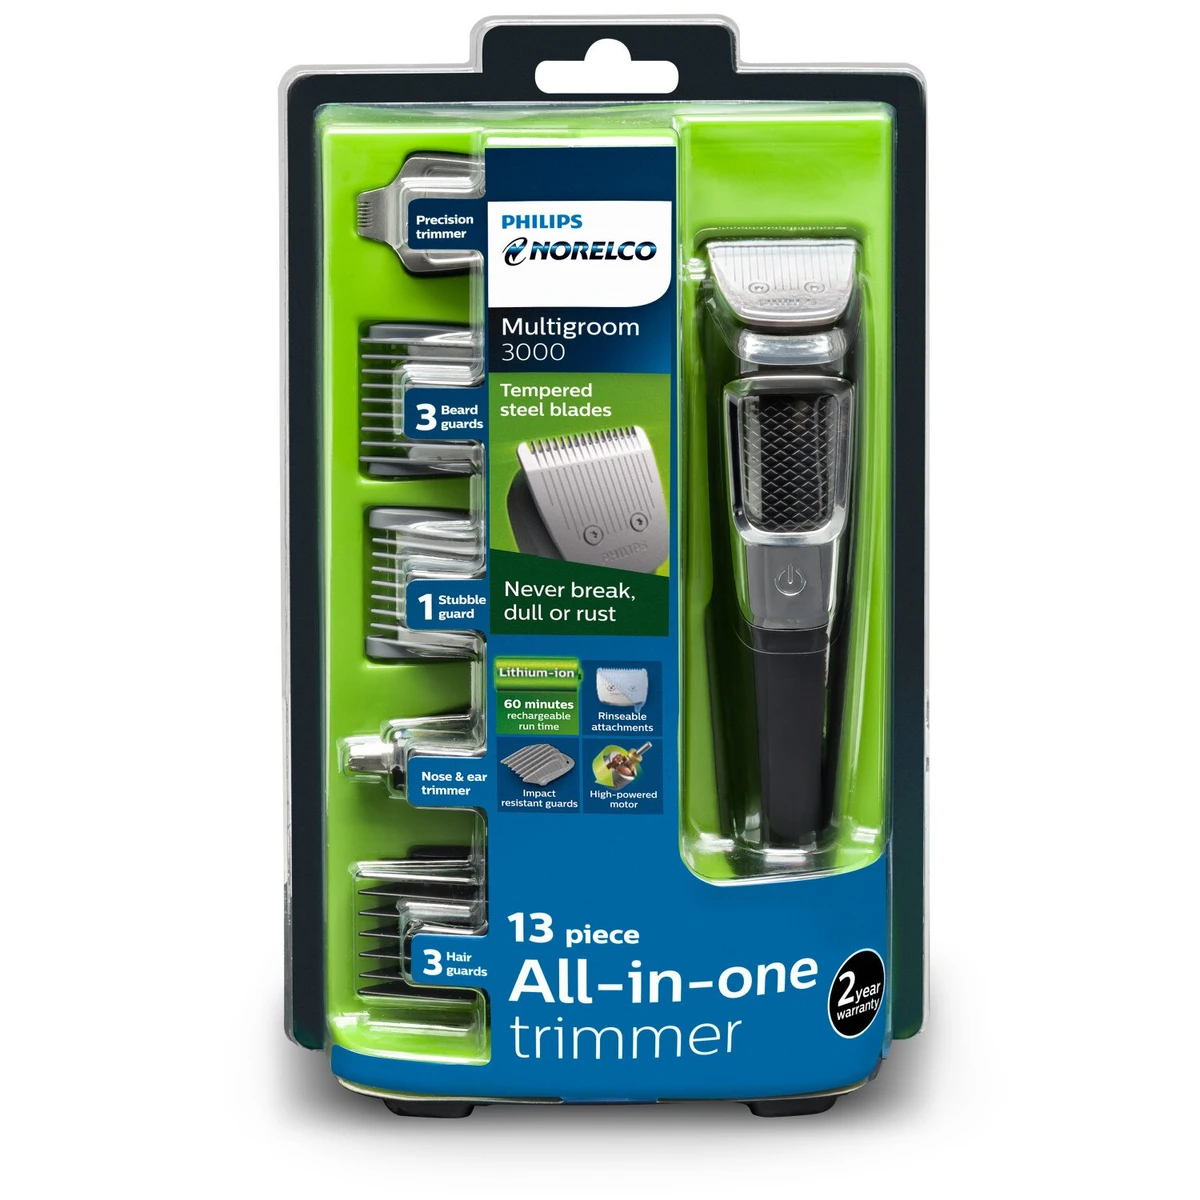 Philips Norelco Series 3000 Multigroom Men's Rechargeable Electric Trimmer MG3750/60 13pc